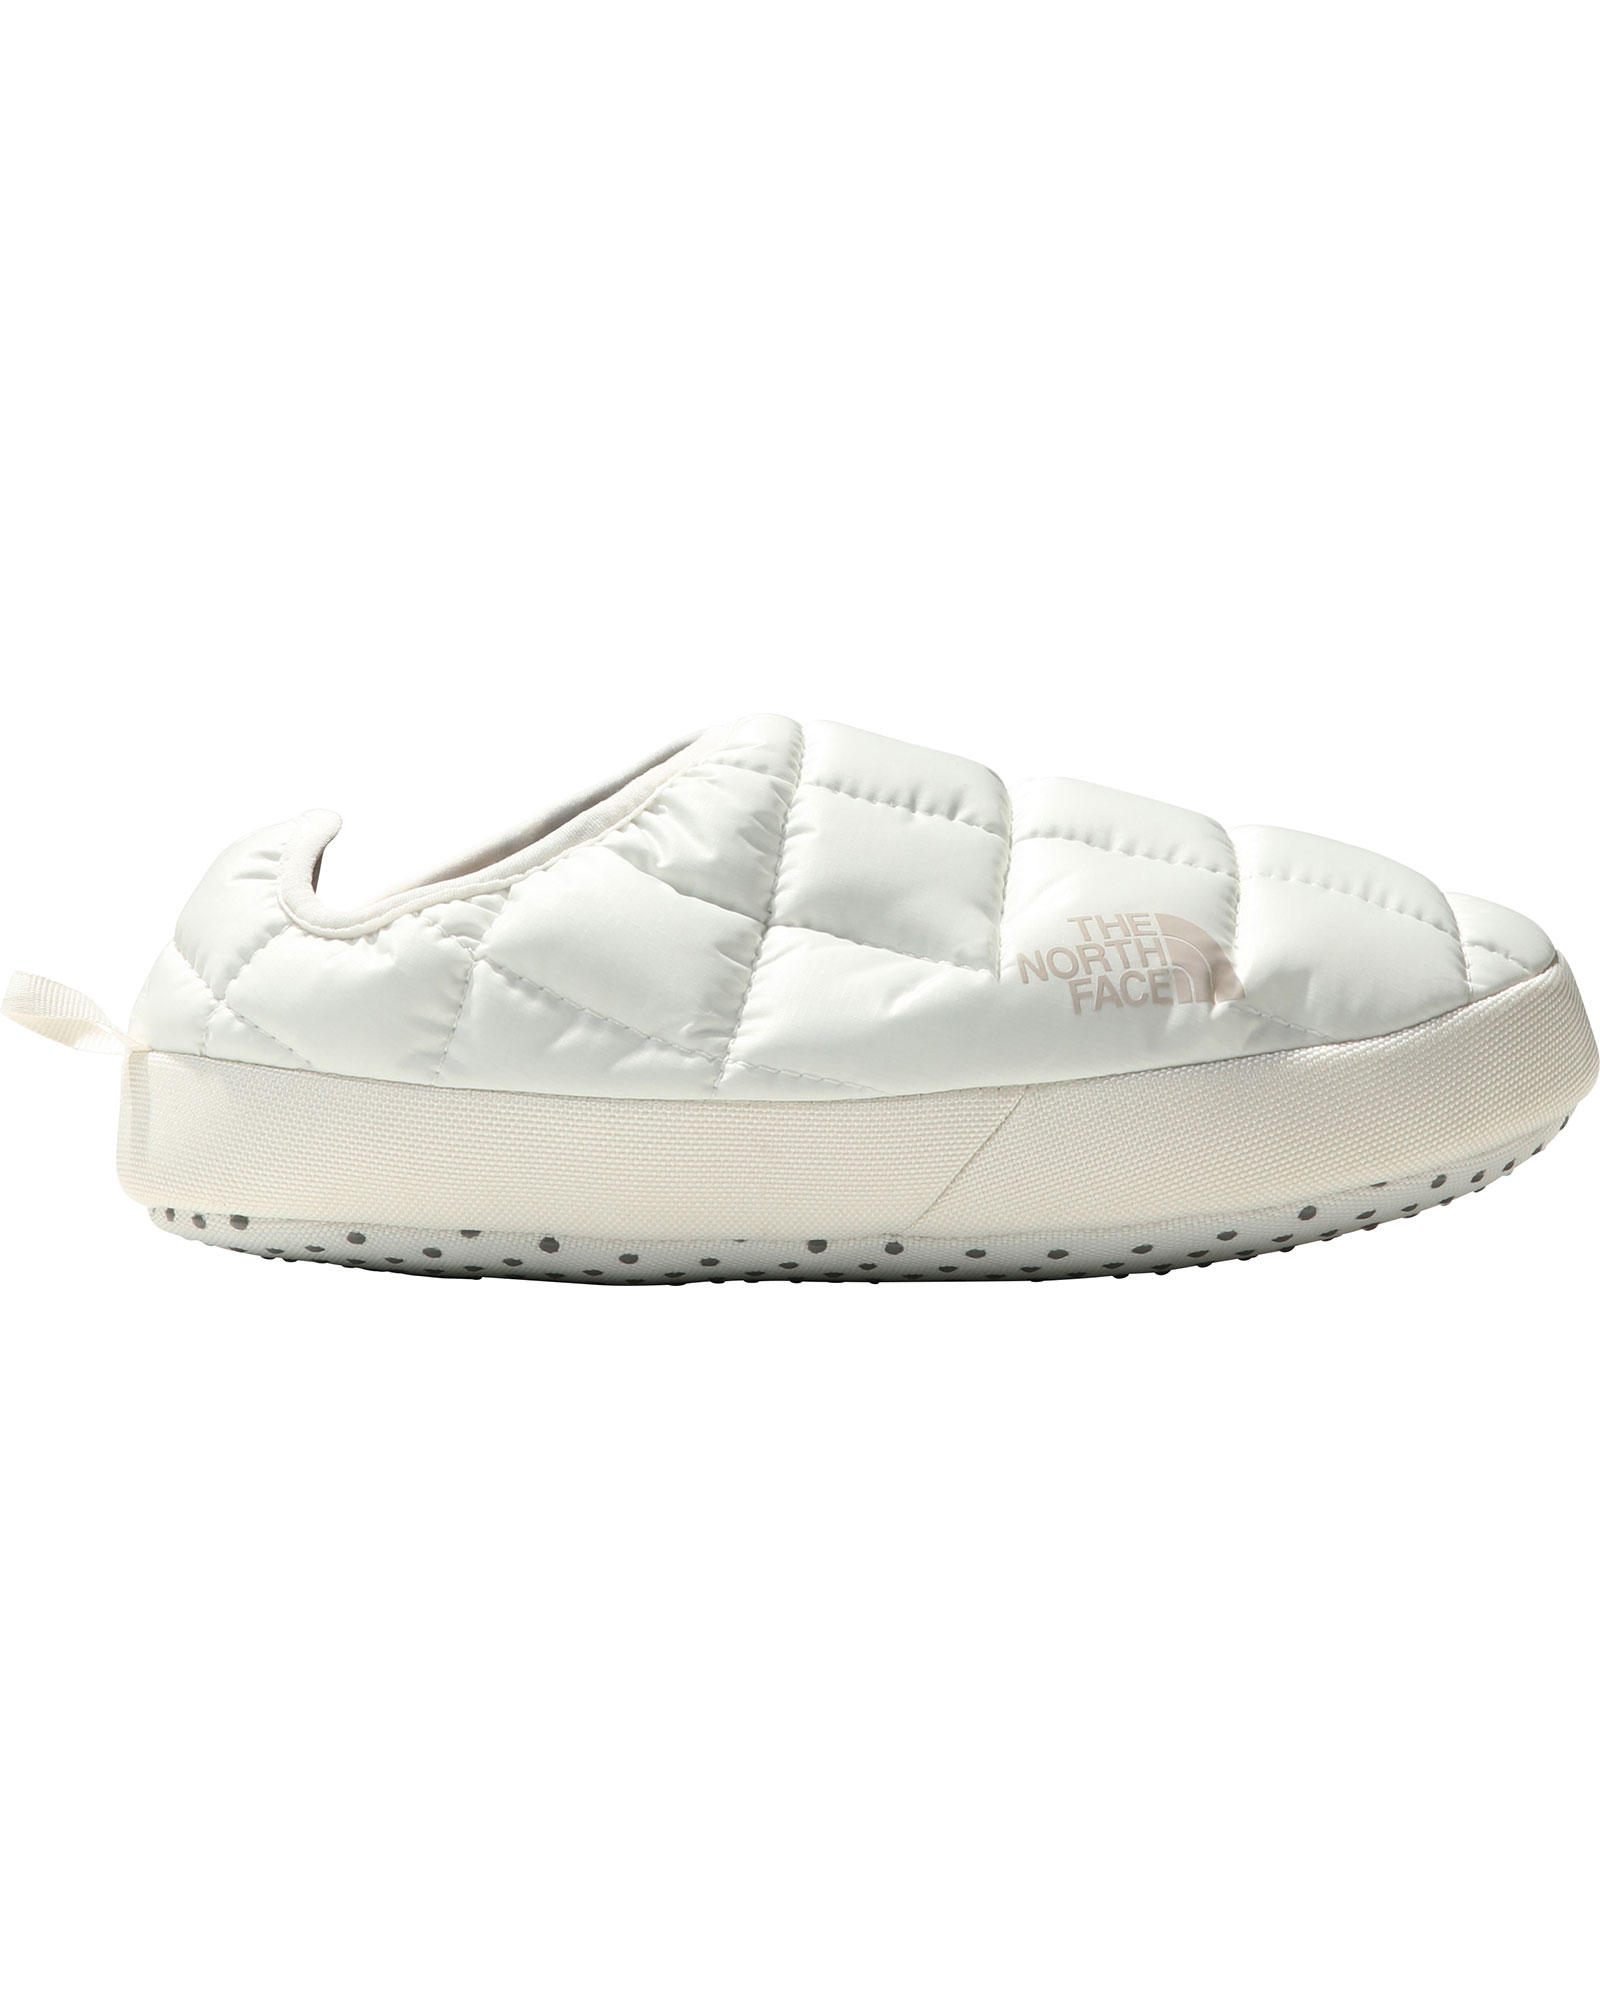 The North Face Women’s ThermoBall V Mules - Gardenia White/Silver Grey XS